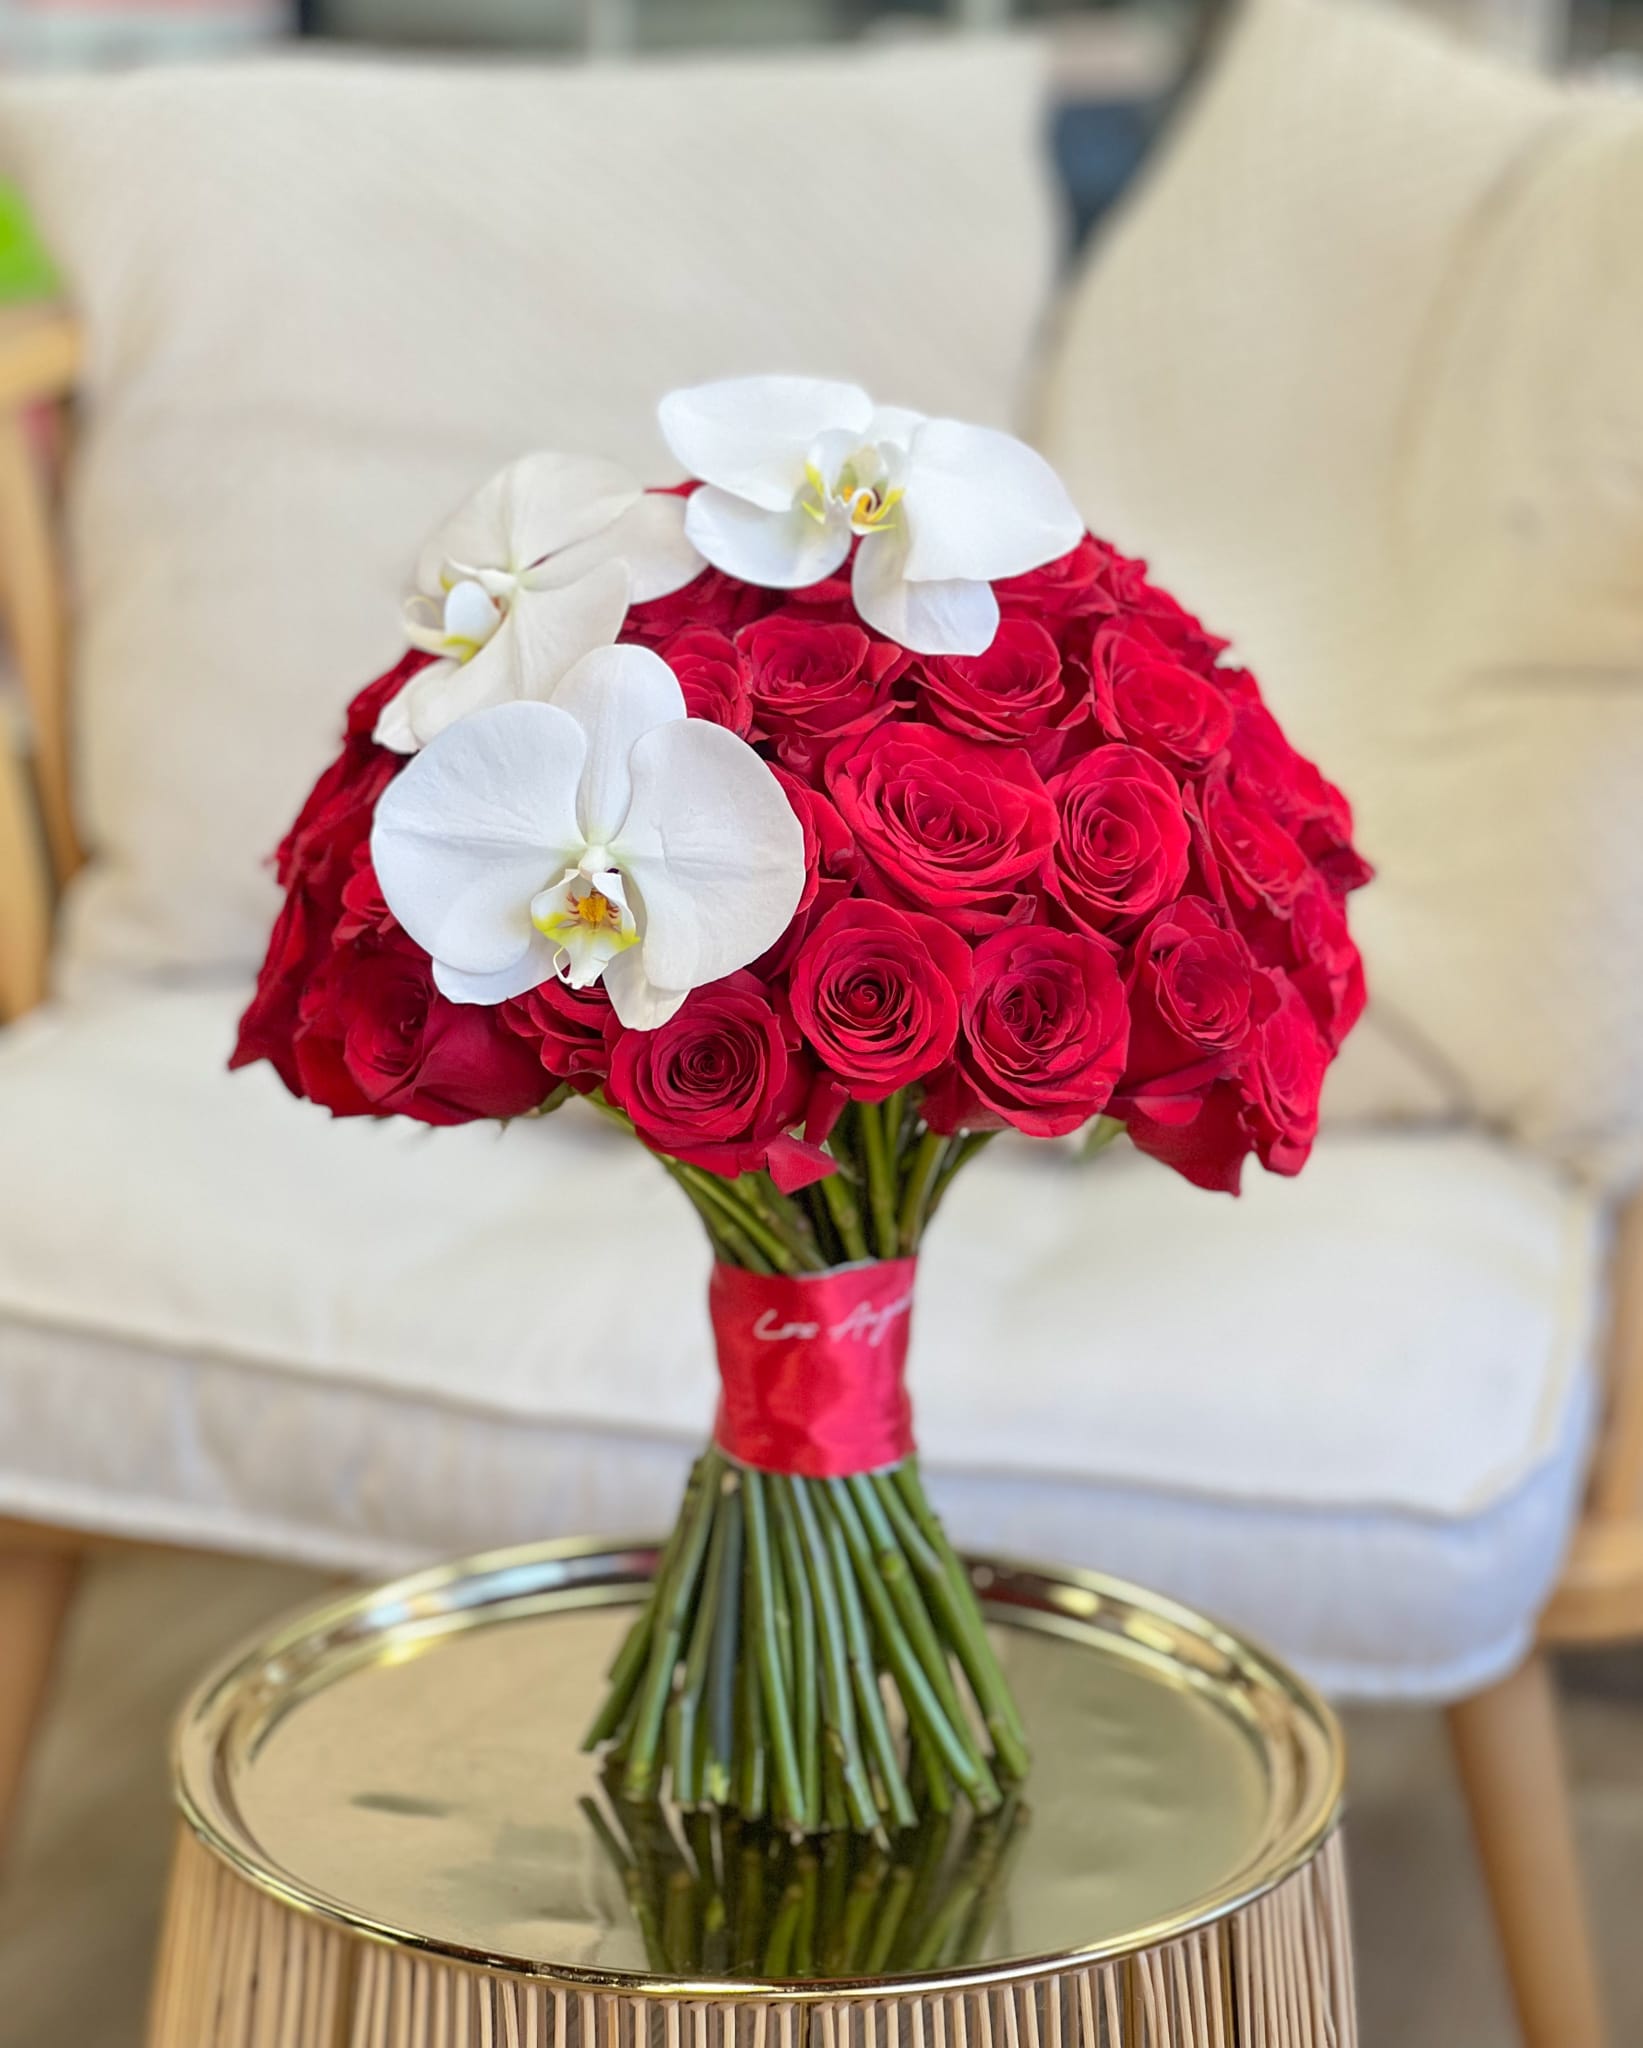 No.405 - RED ROSES WIT ORCHIDS - Bouquet with red roses and orchids  Standard 75 roses Deluxe 100 roses Premium 150 roses